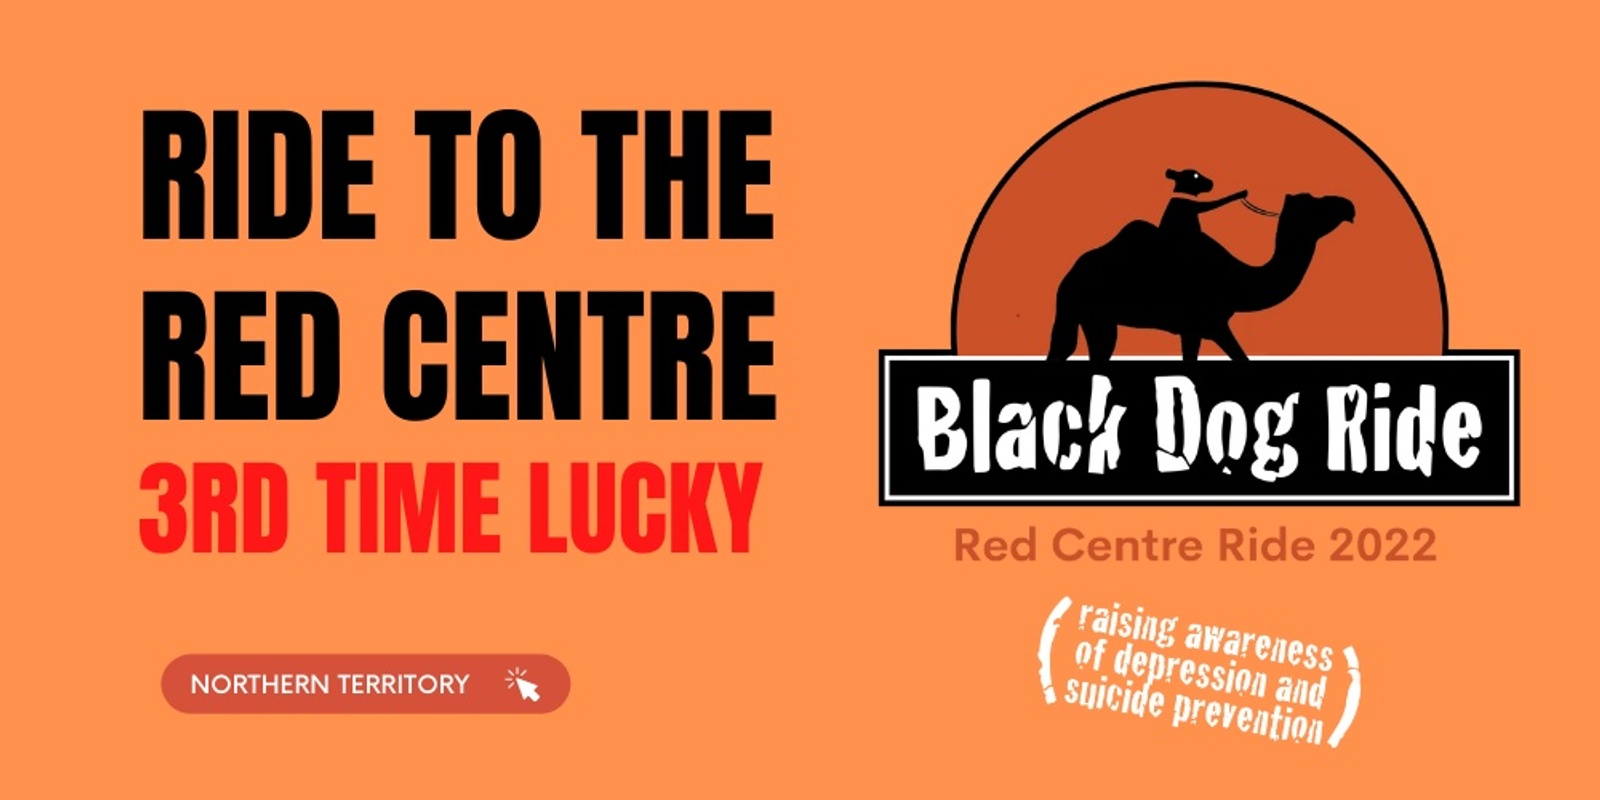 Banner image for NT Black Dog Ride to the Red Centre 2022